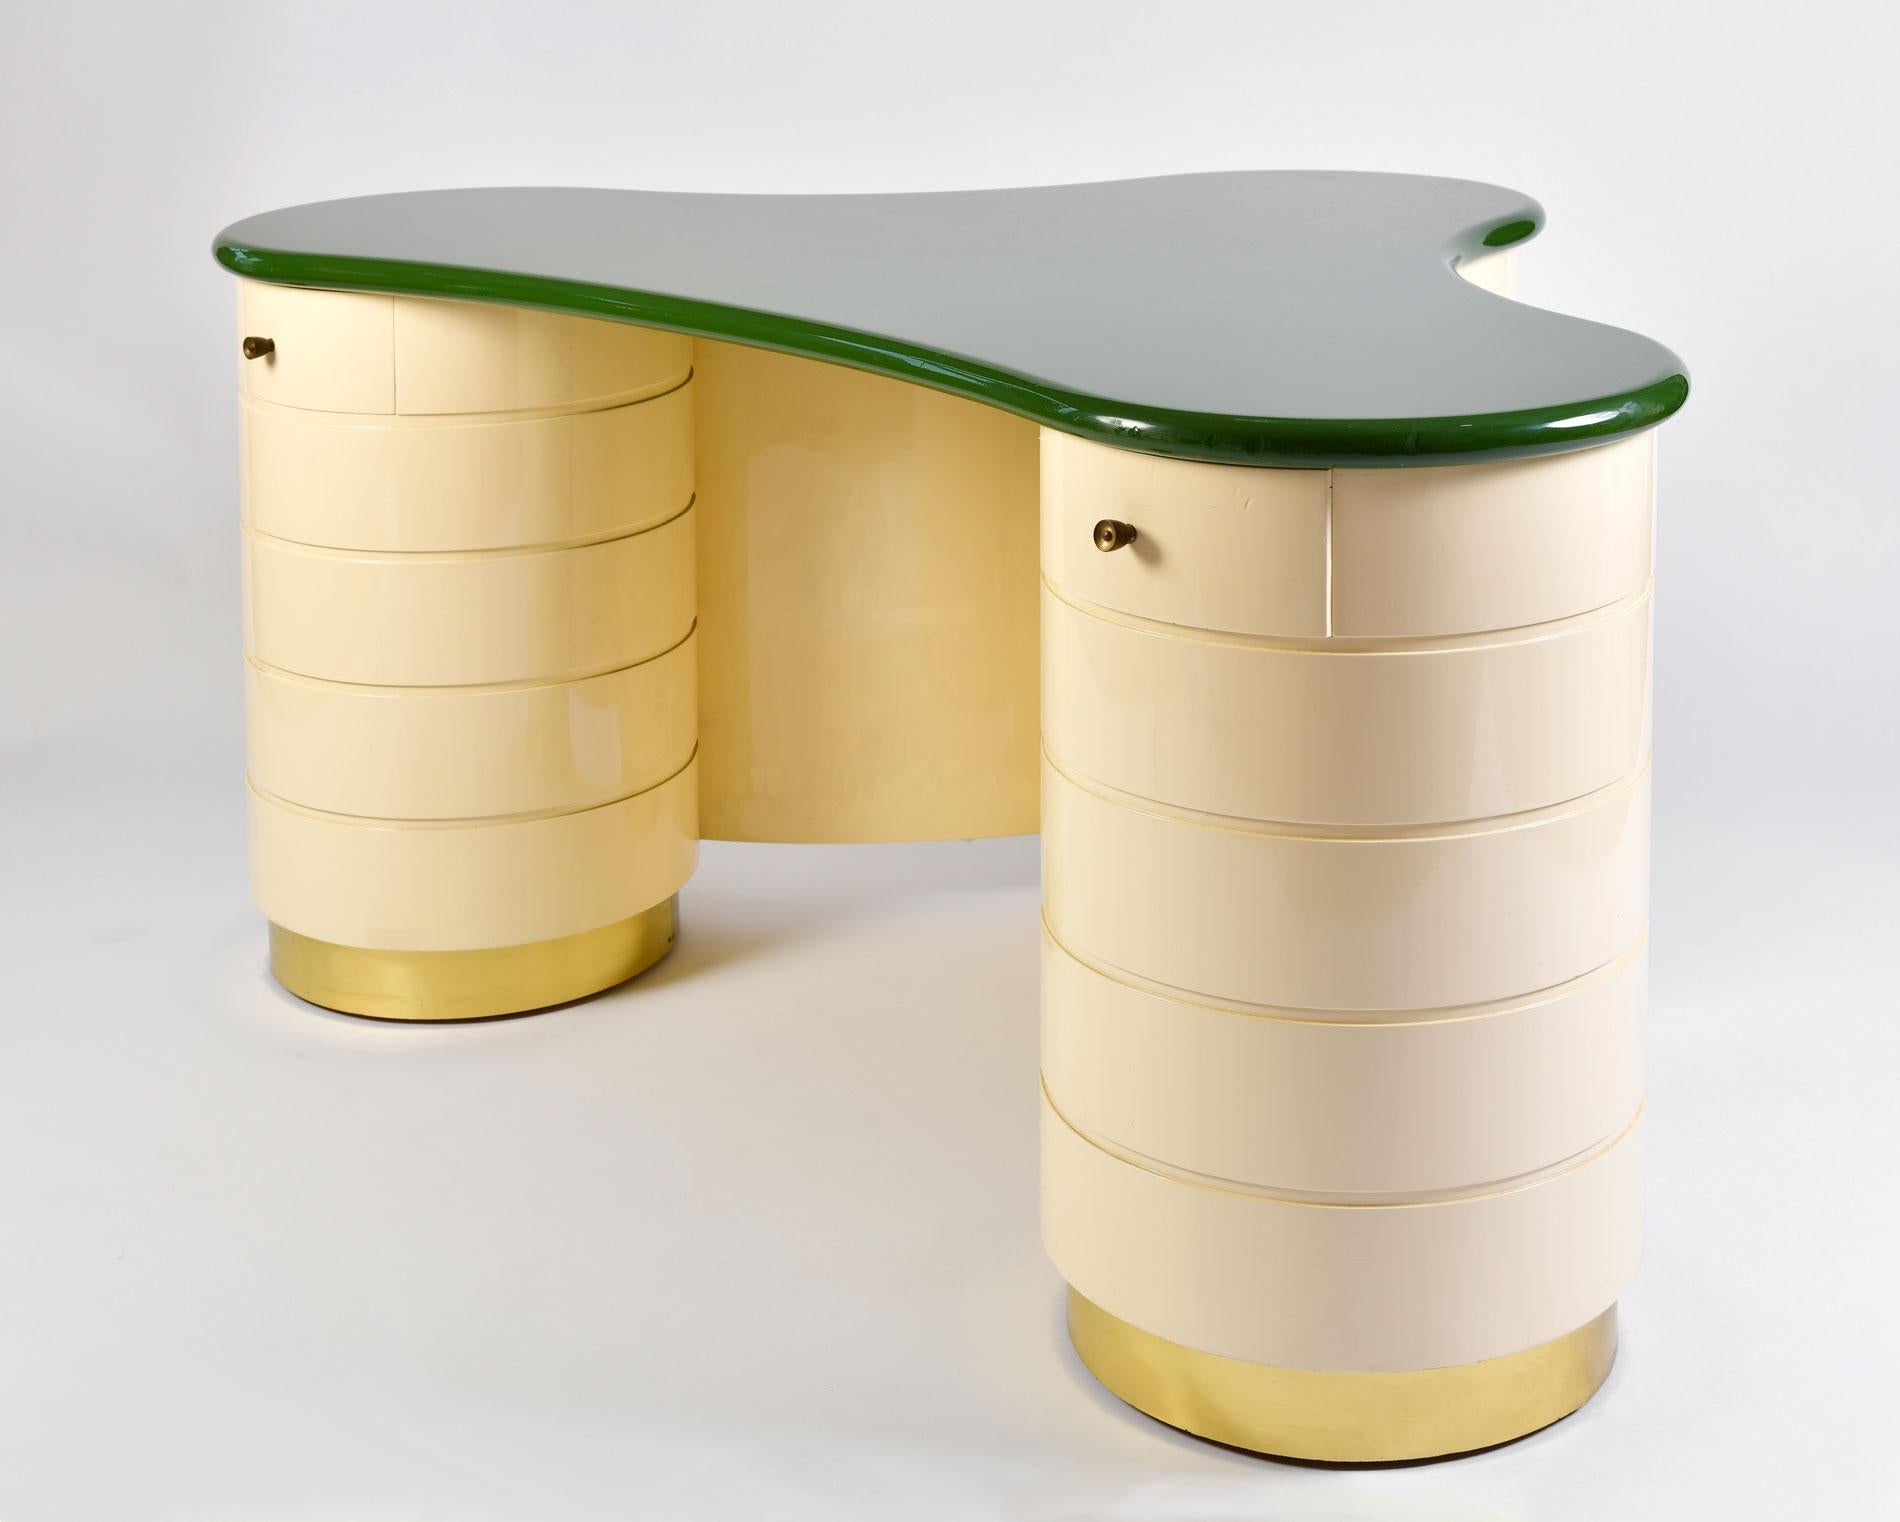 Ultra glamorous dressing-table/desk in a surrealist deco style. Three large cream lacquered circular pillars each with their own drawer stand on brass supports. In contrast a generous lacquered green top completes the dramatic effect.